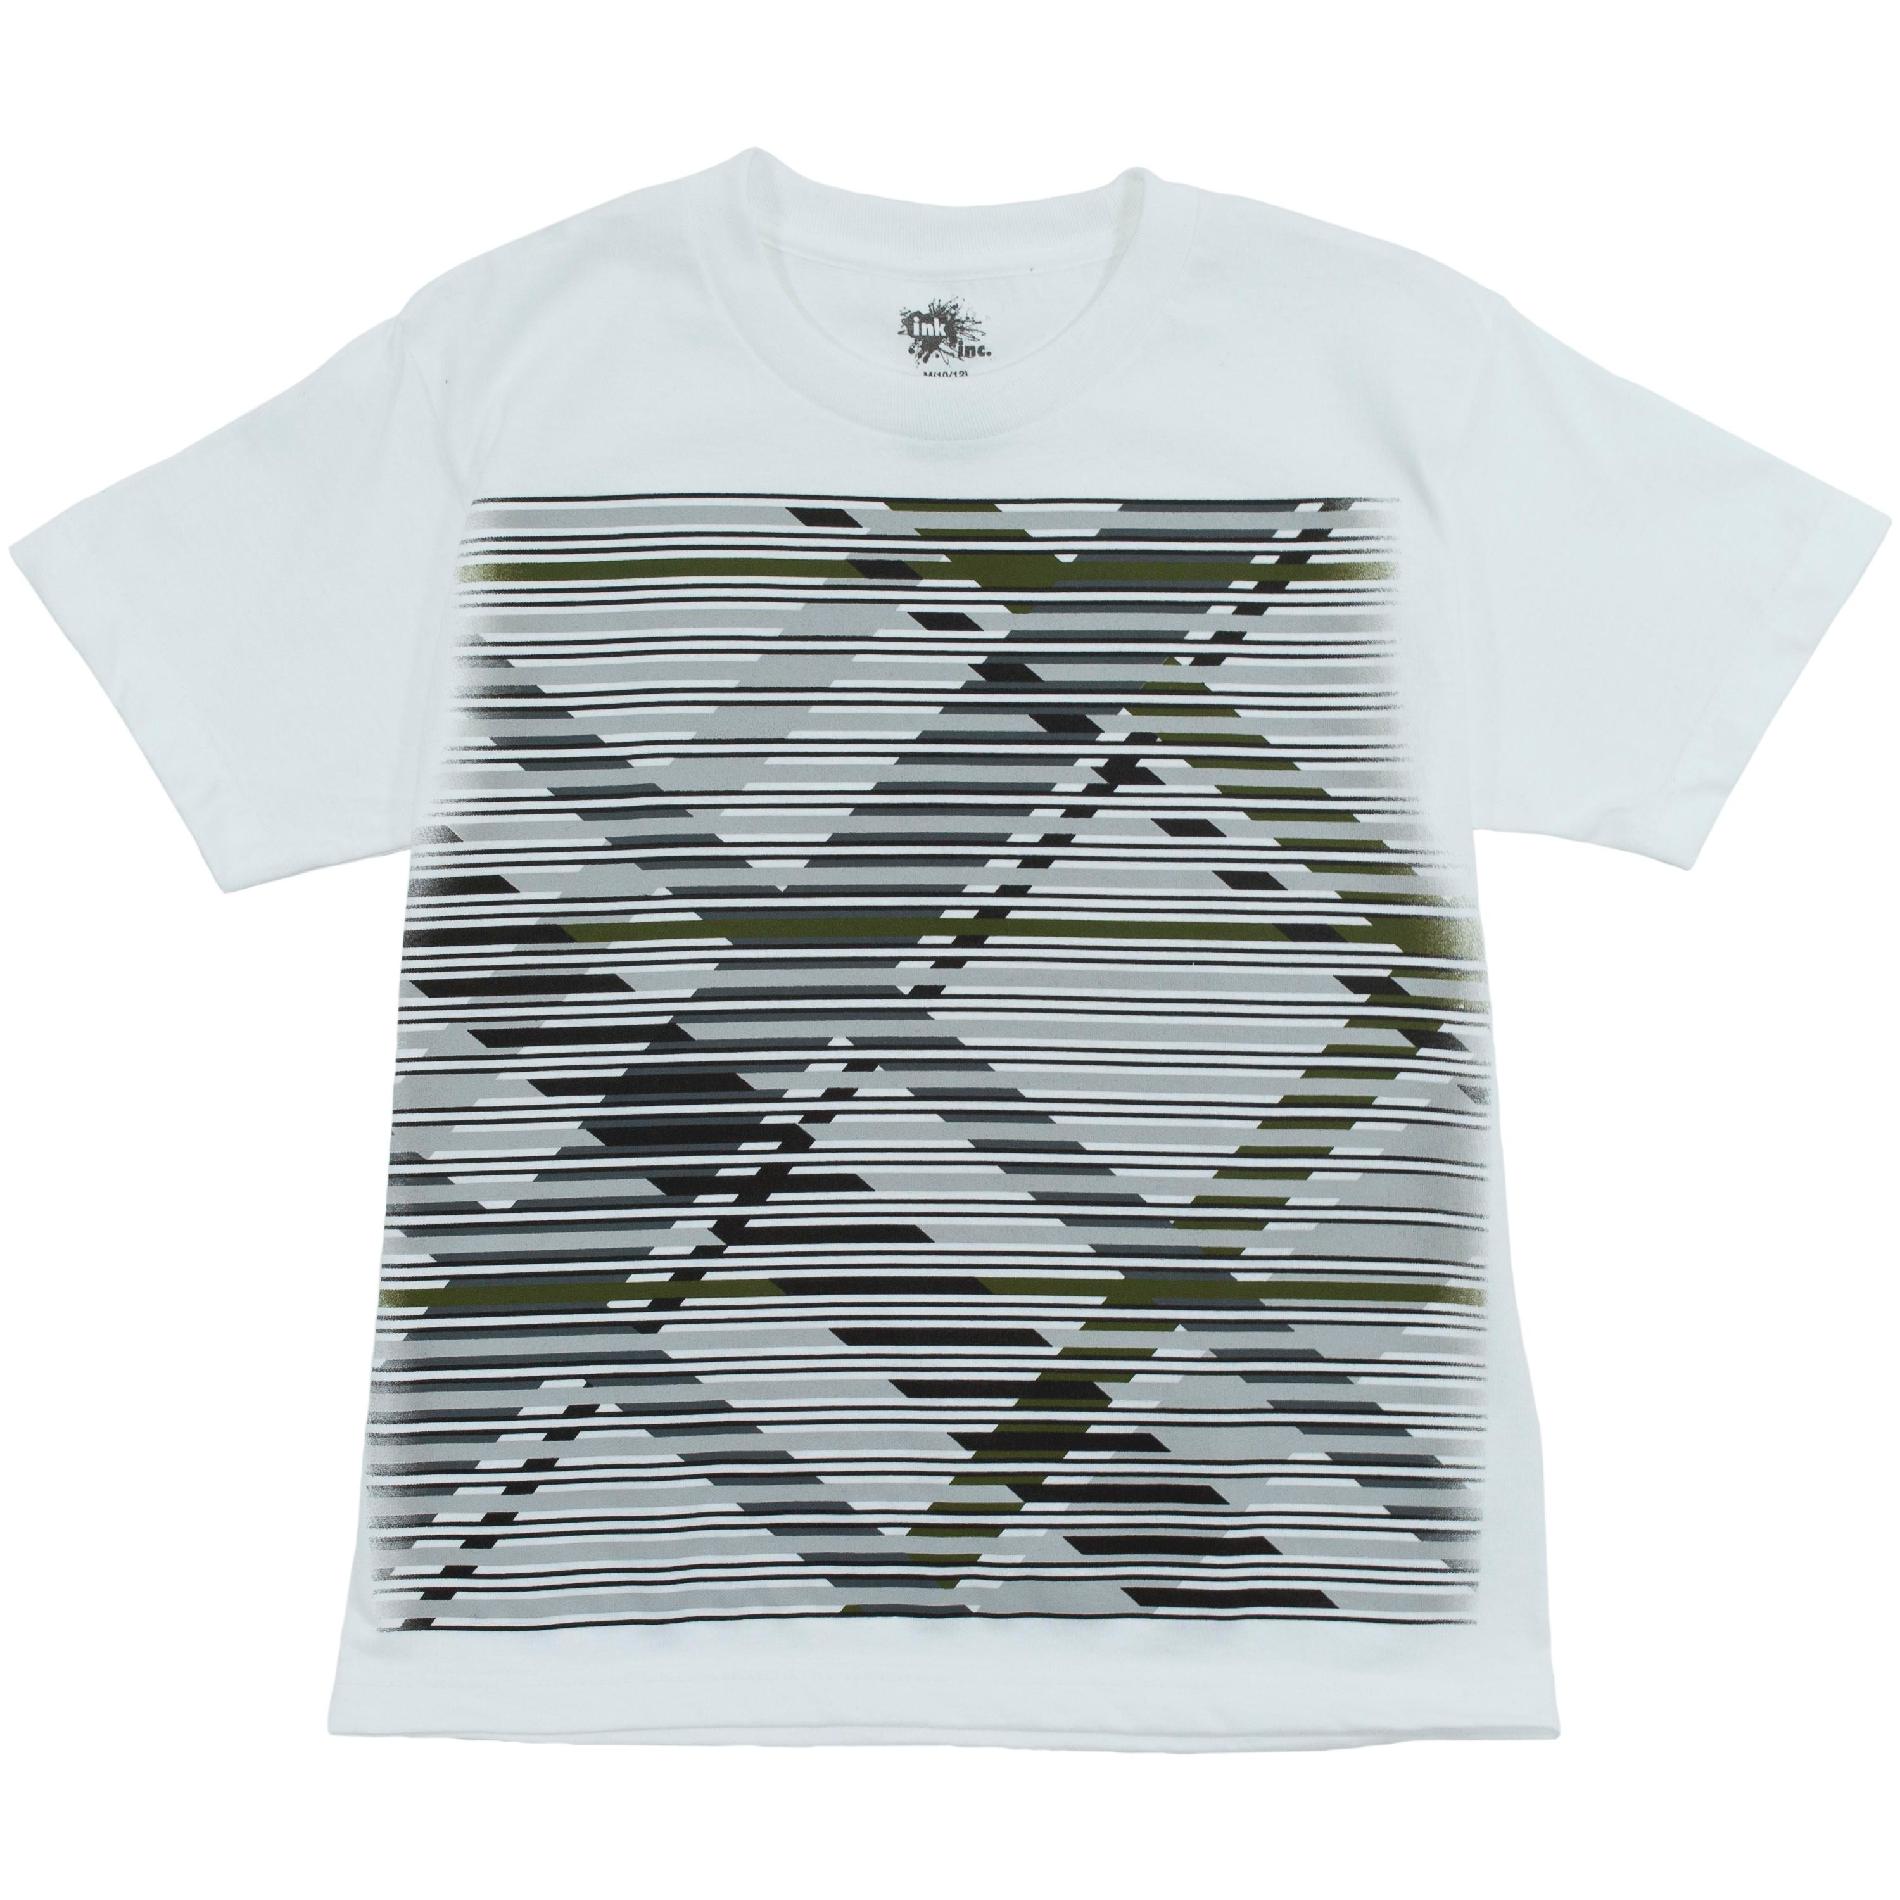 Infinite Visions Boy's Graphic T-Shirt - Abstract Plaid